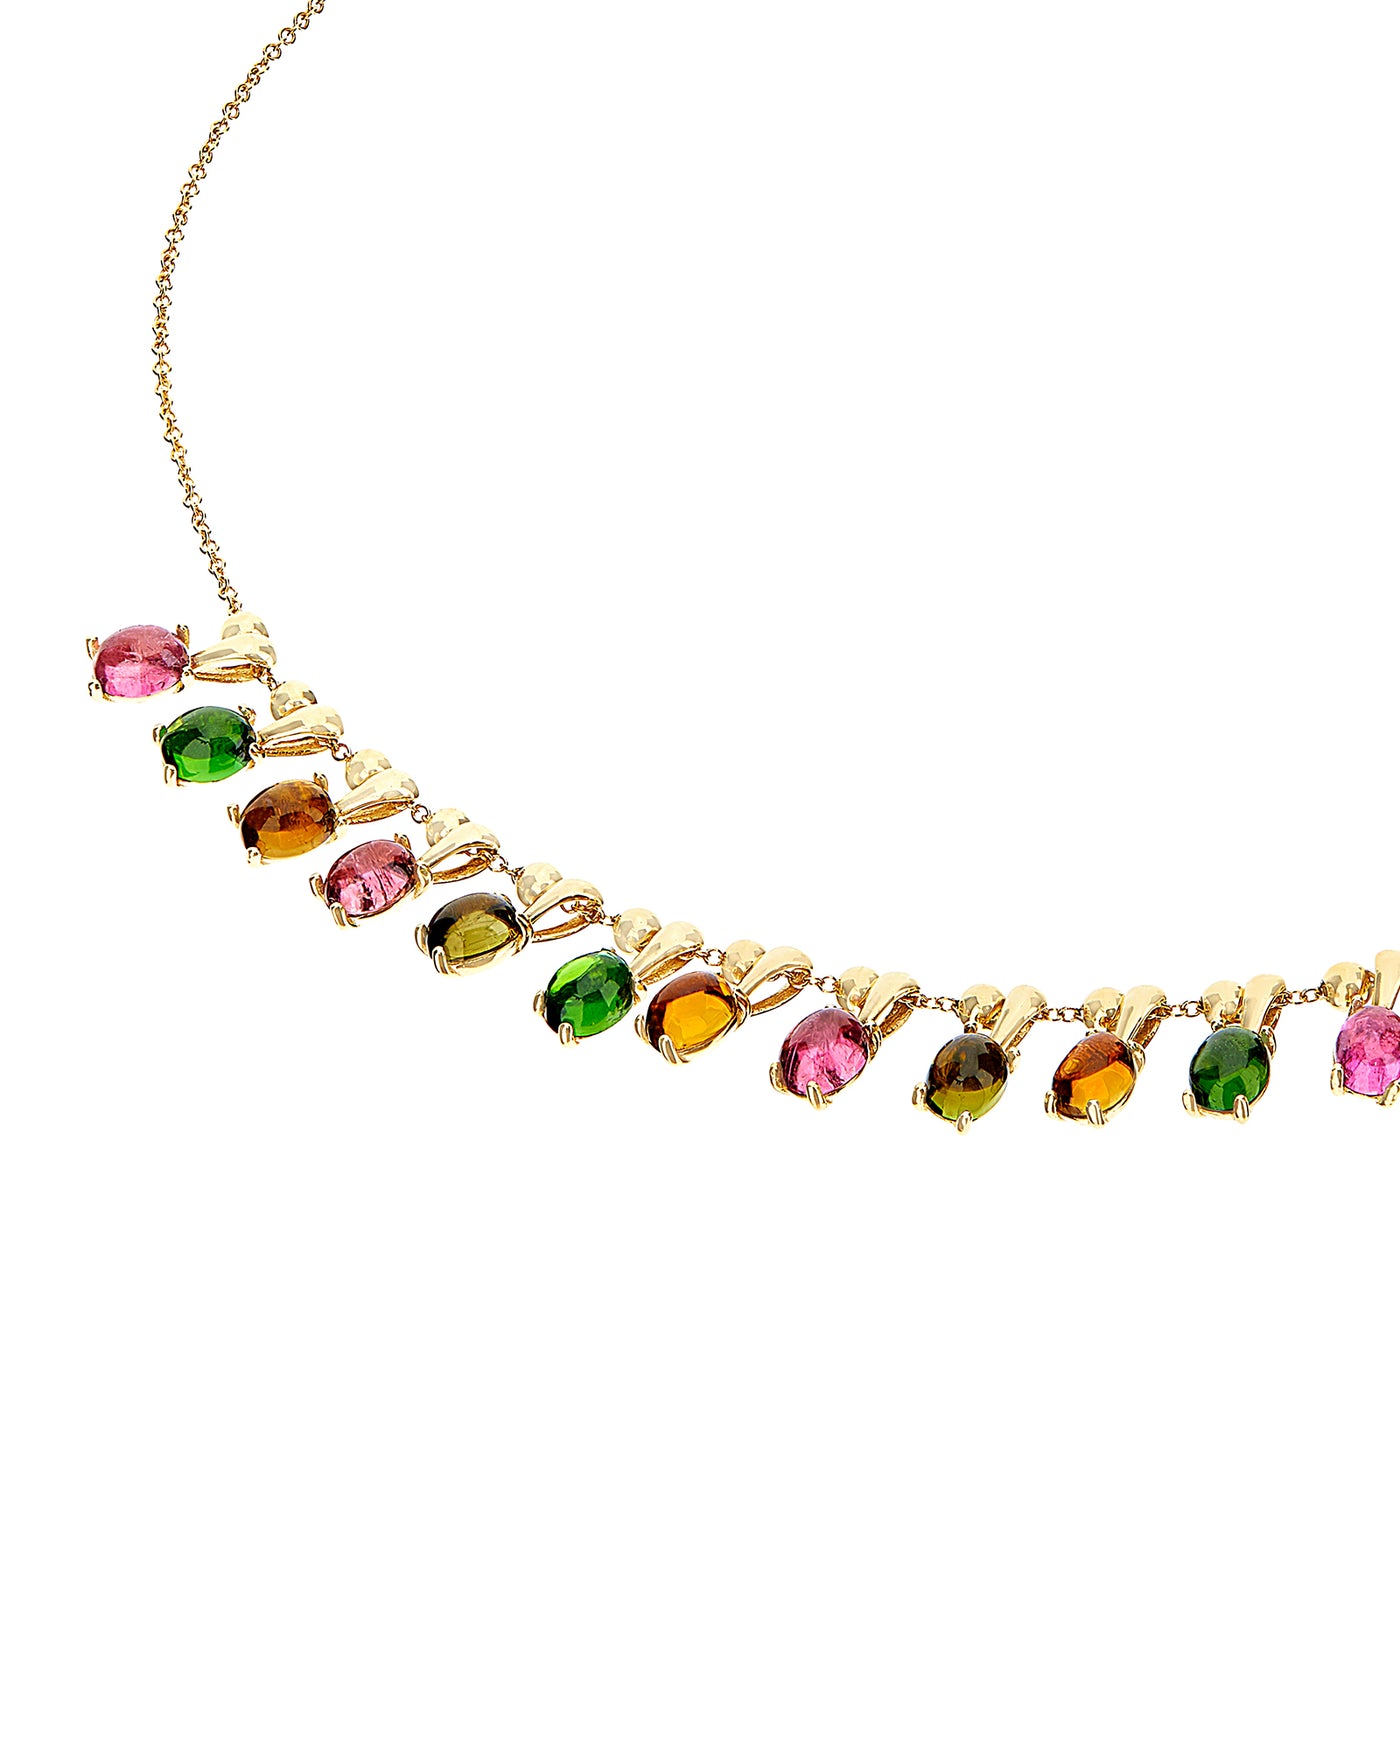 "tourmalines" gold and tourmaline colorful collar necklace